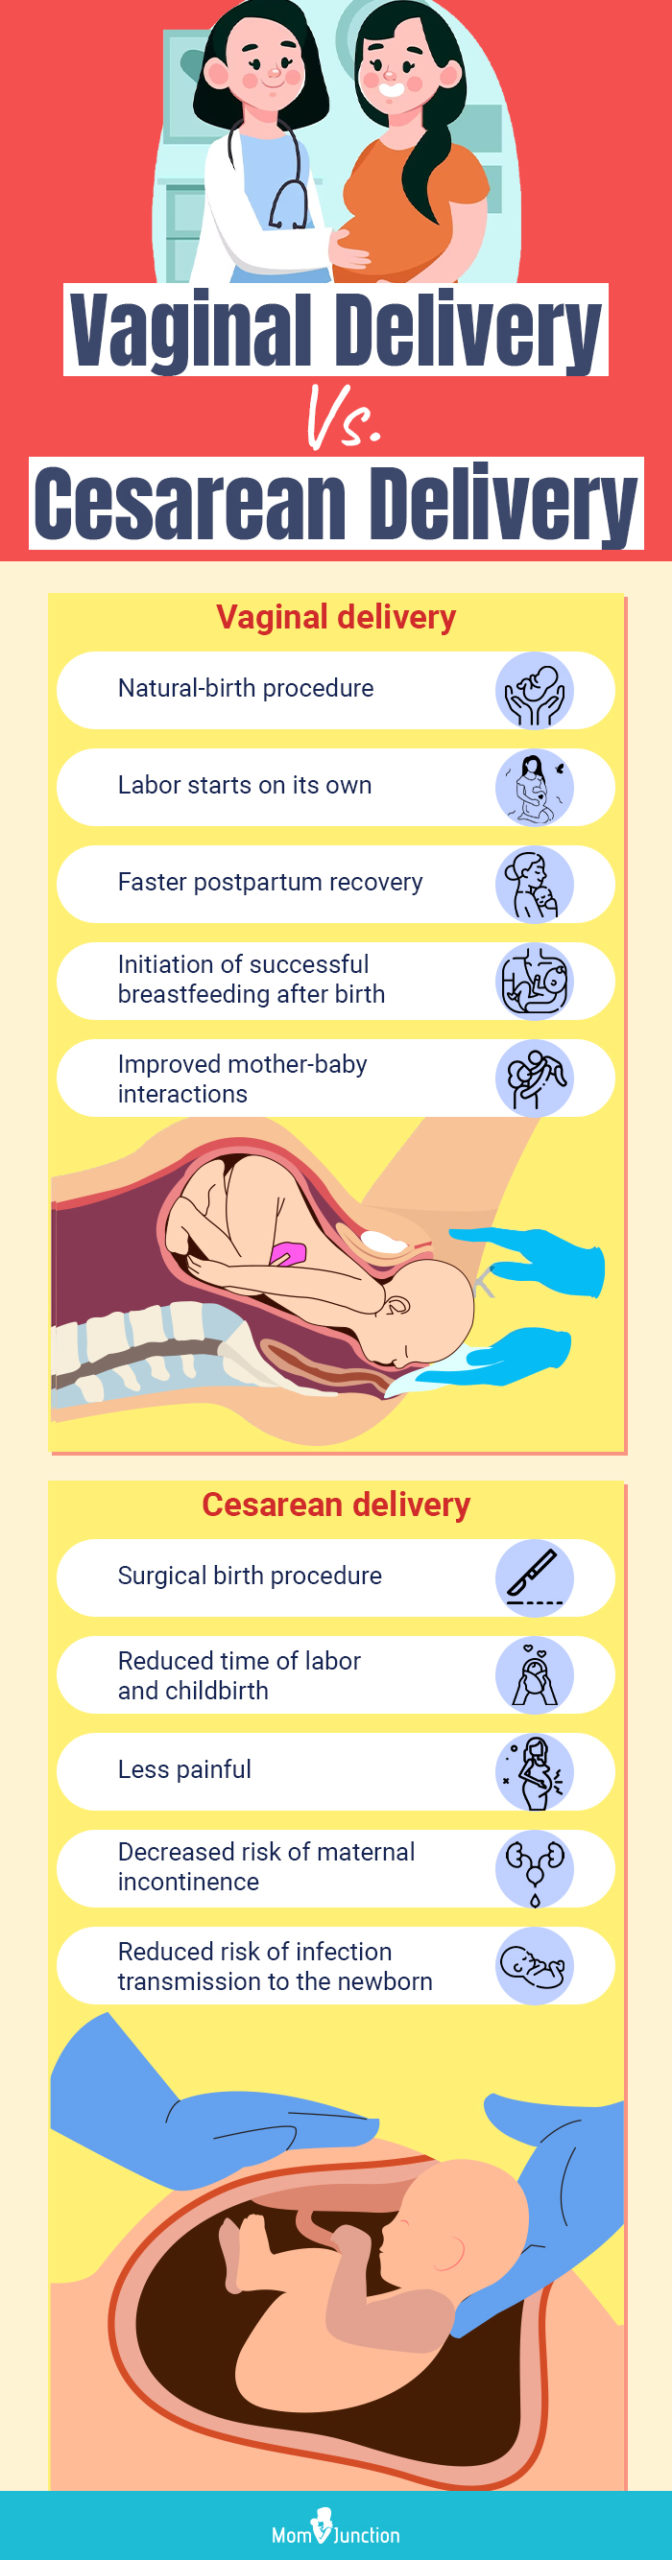 C-Section vs. Forceps: Which is Safer For Your Baby?